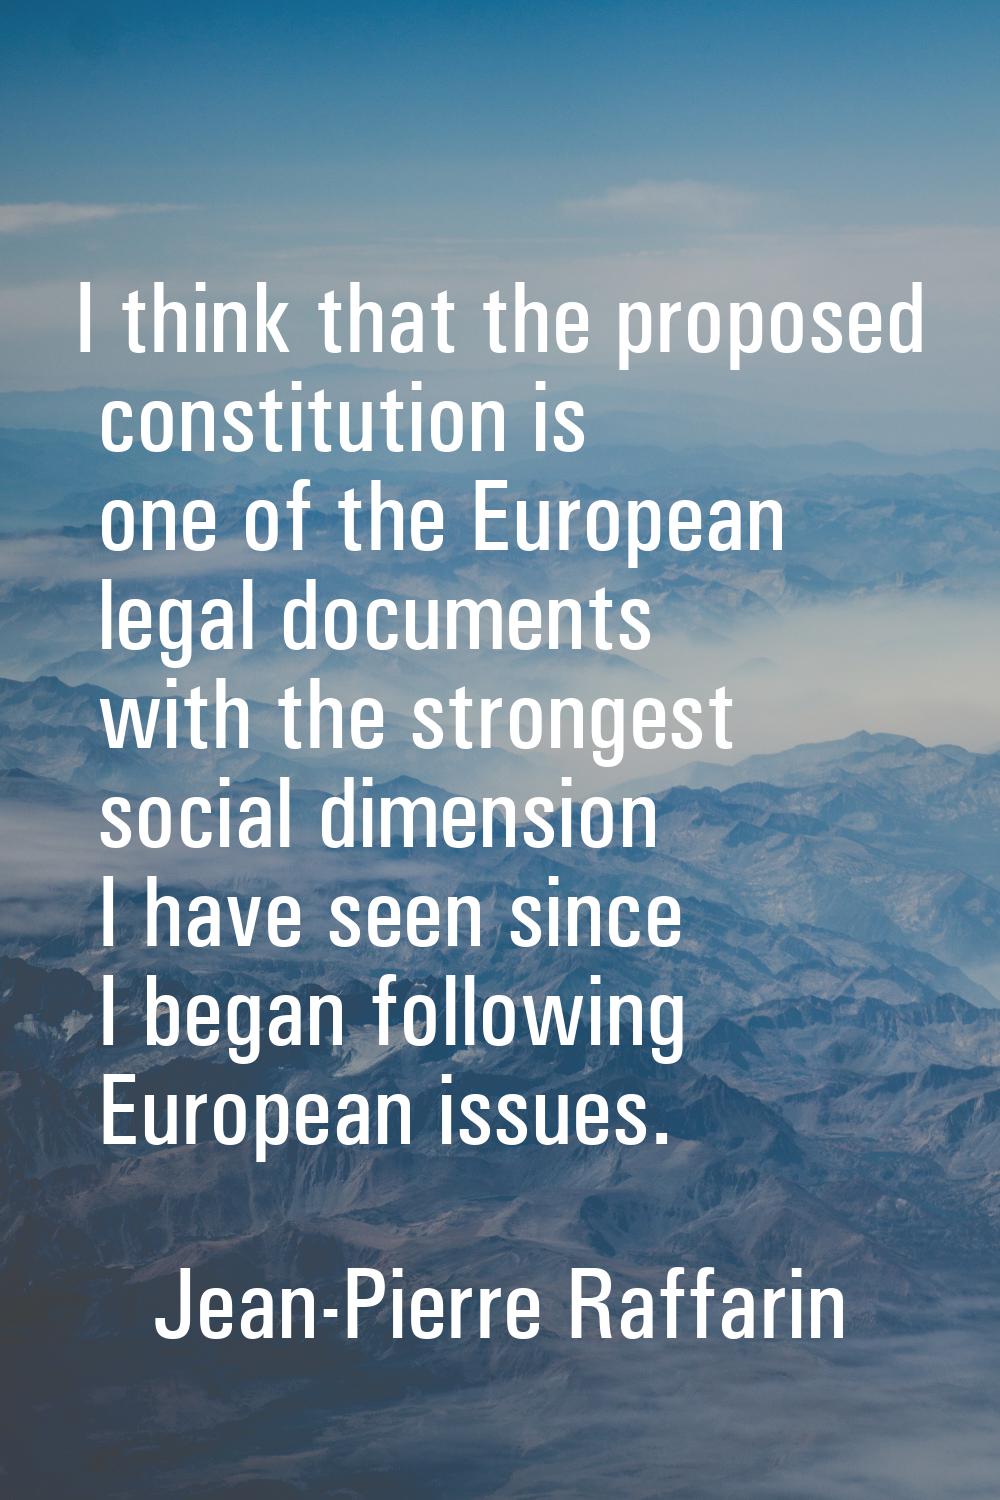 I think that the proposed constitution is one of the European legal documents with the strongest so